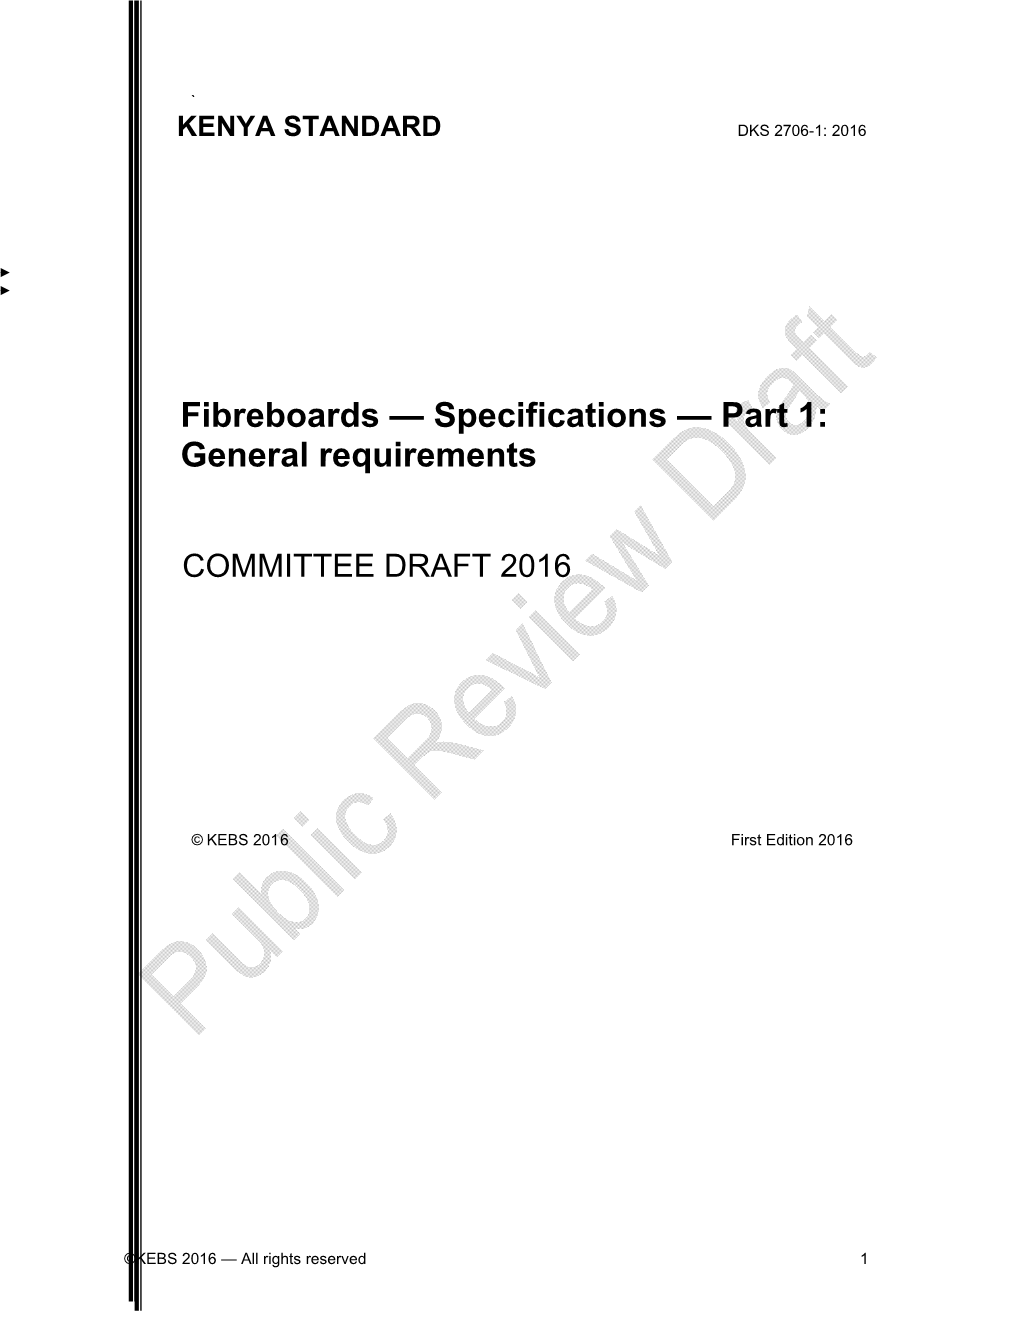 Fibreboards — Specifications — Part 1: General Requirements